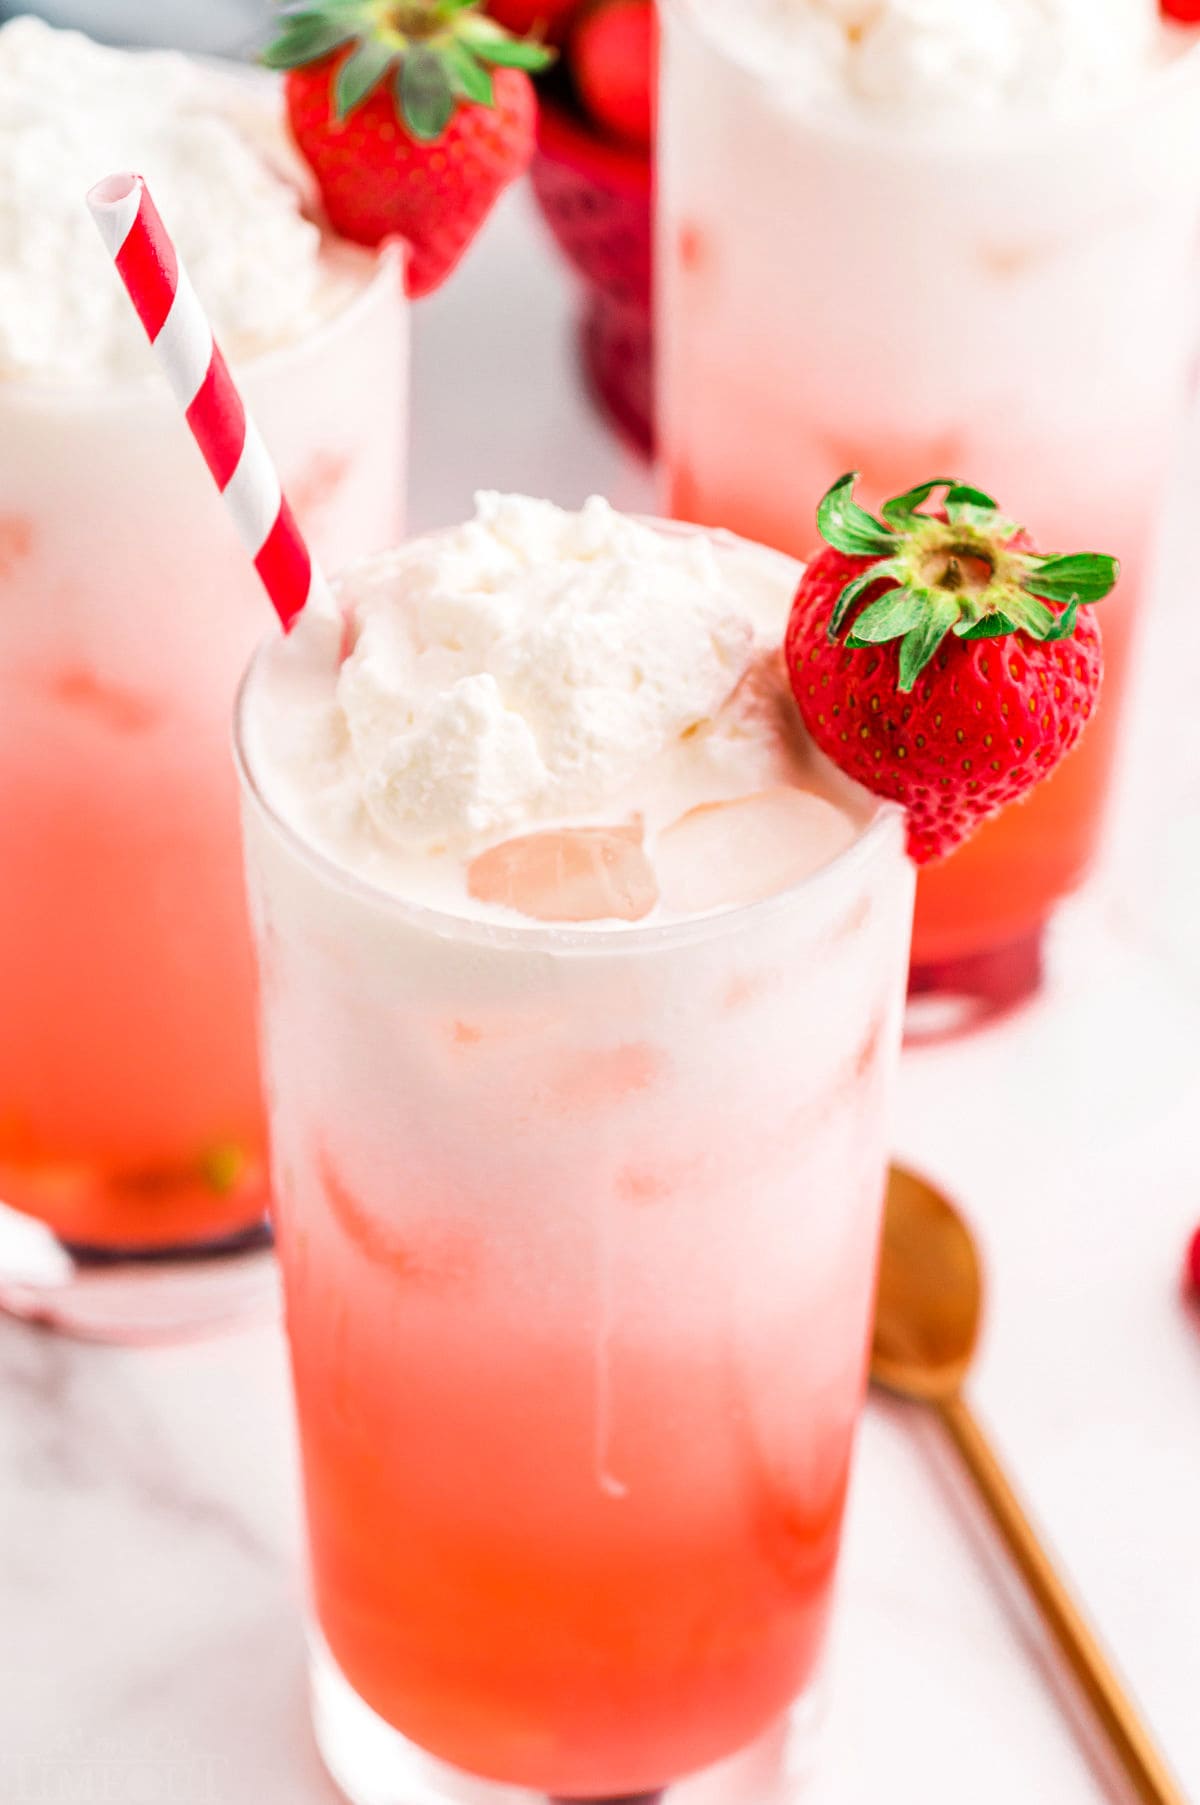 top down look at filled glass with italian soda flavored with strawberry syrup. red and white striped straw in the glass.